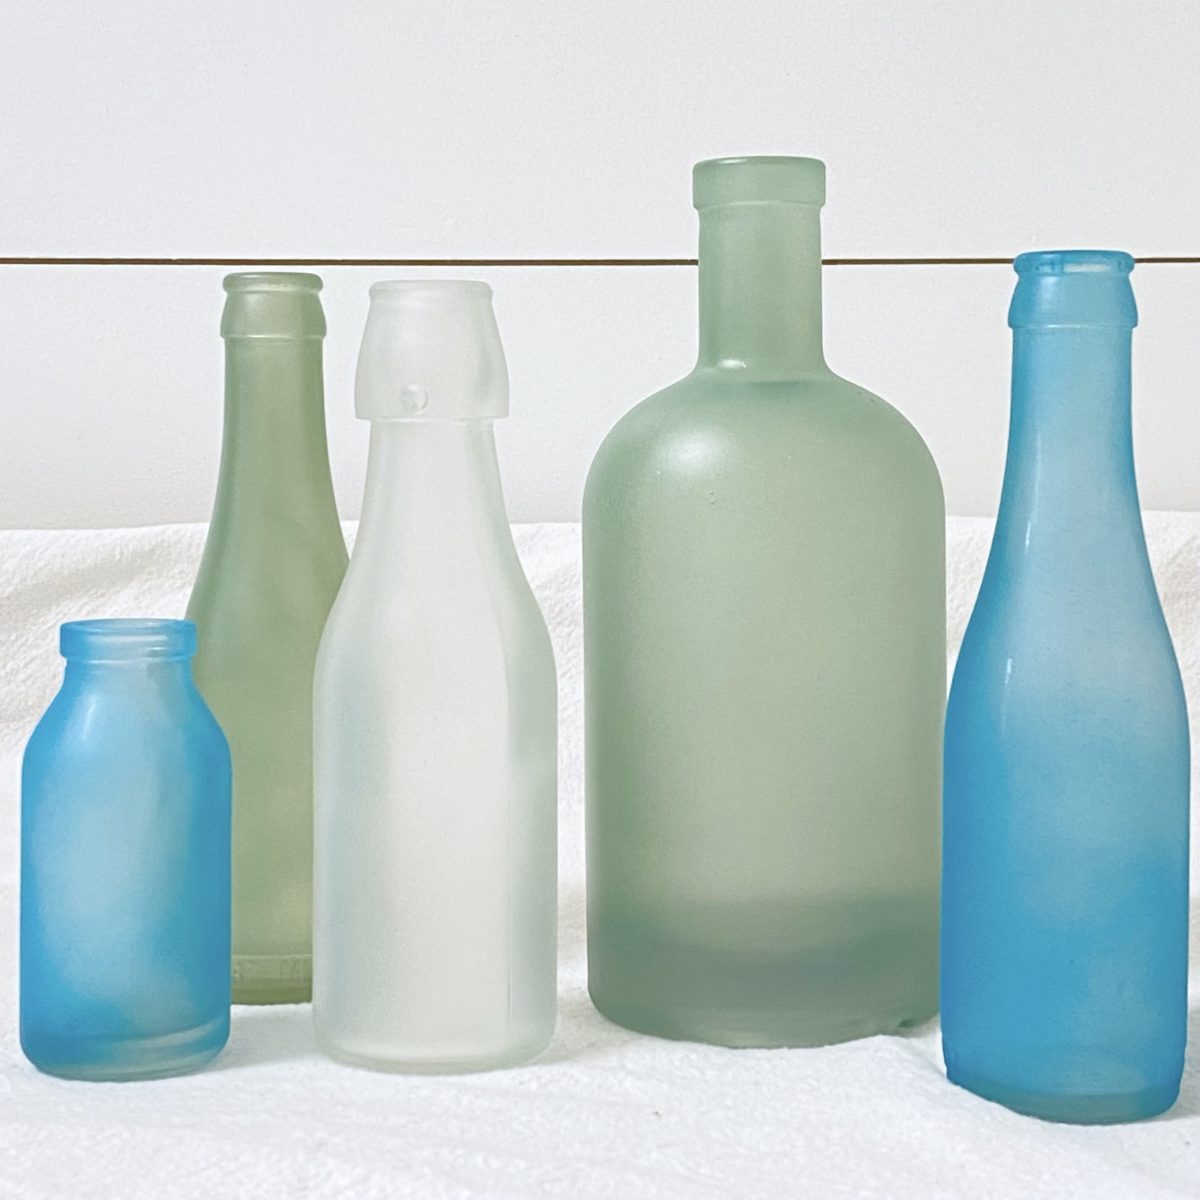 DIY sea glass bottles in shades of white, blue, and green.